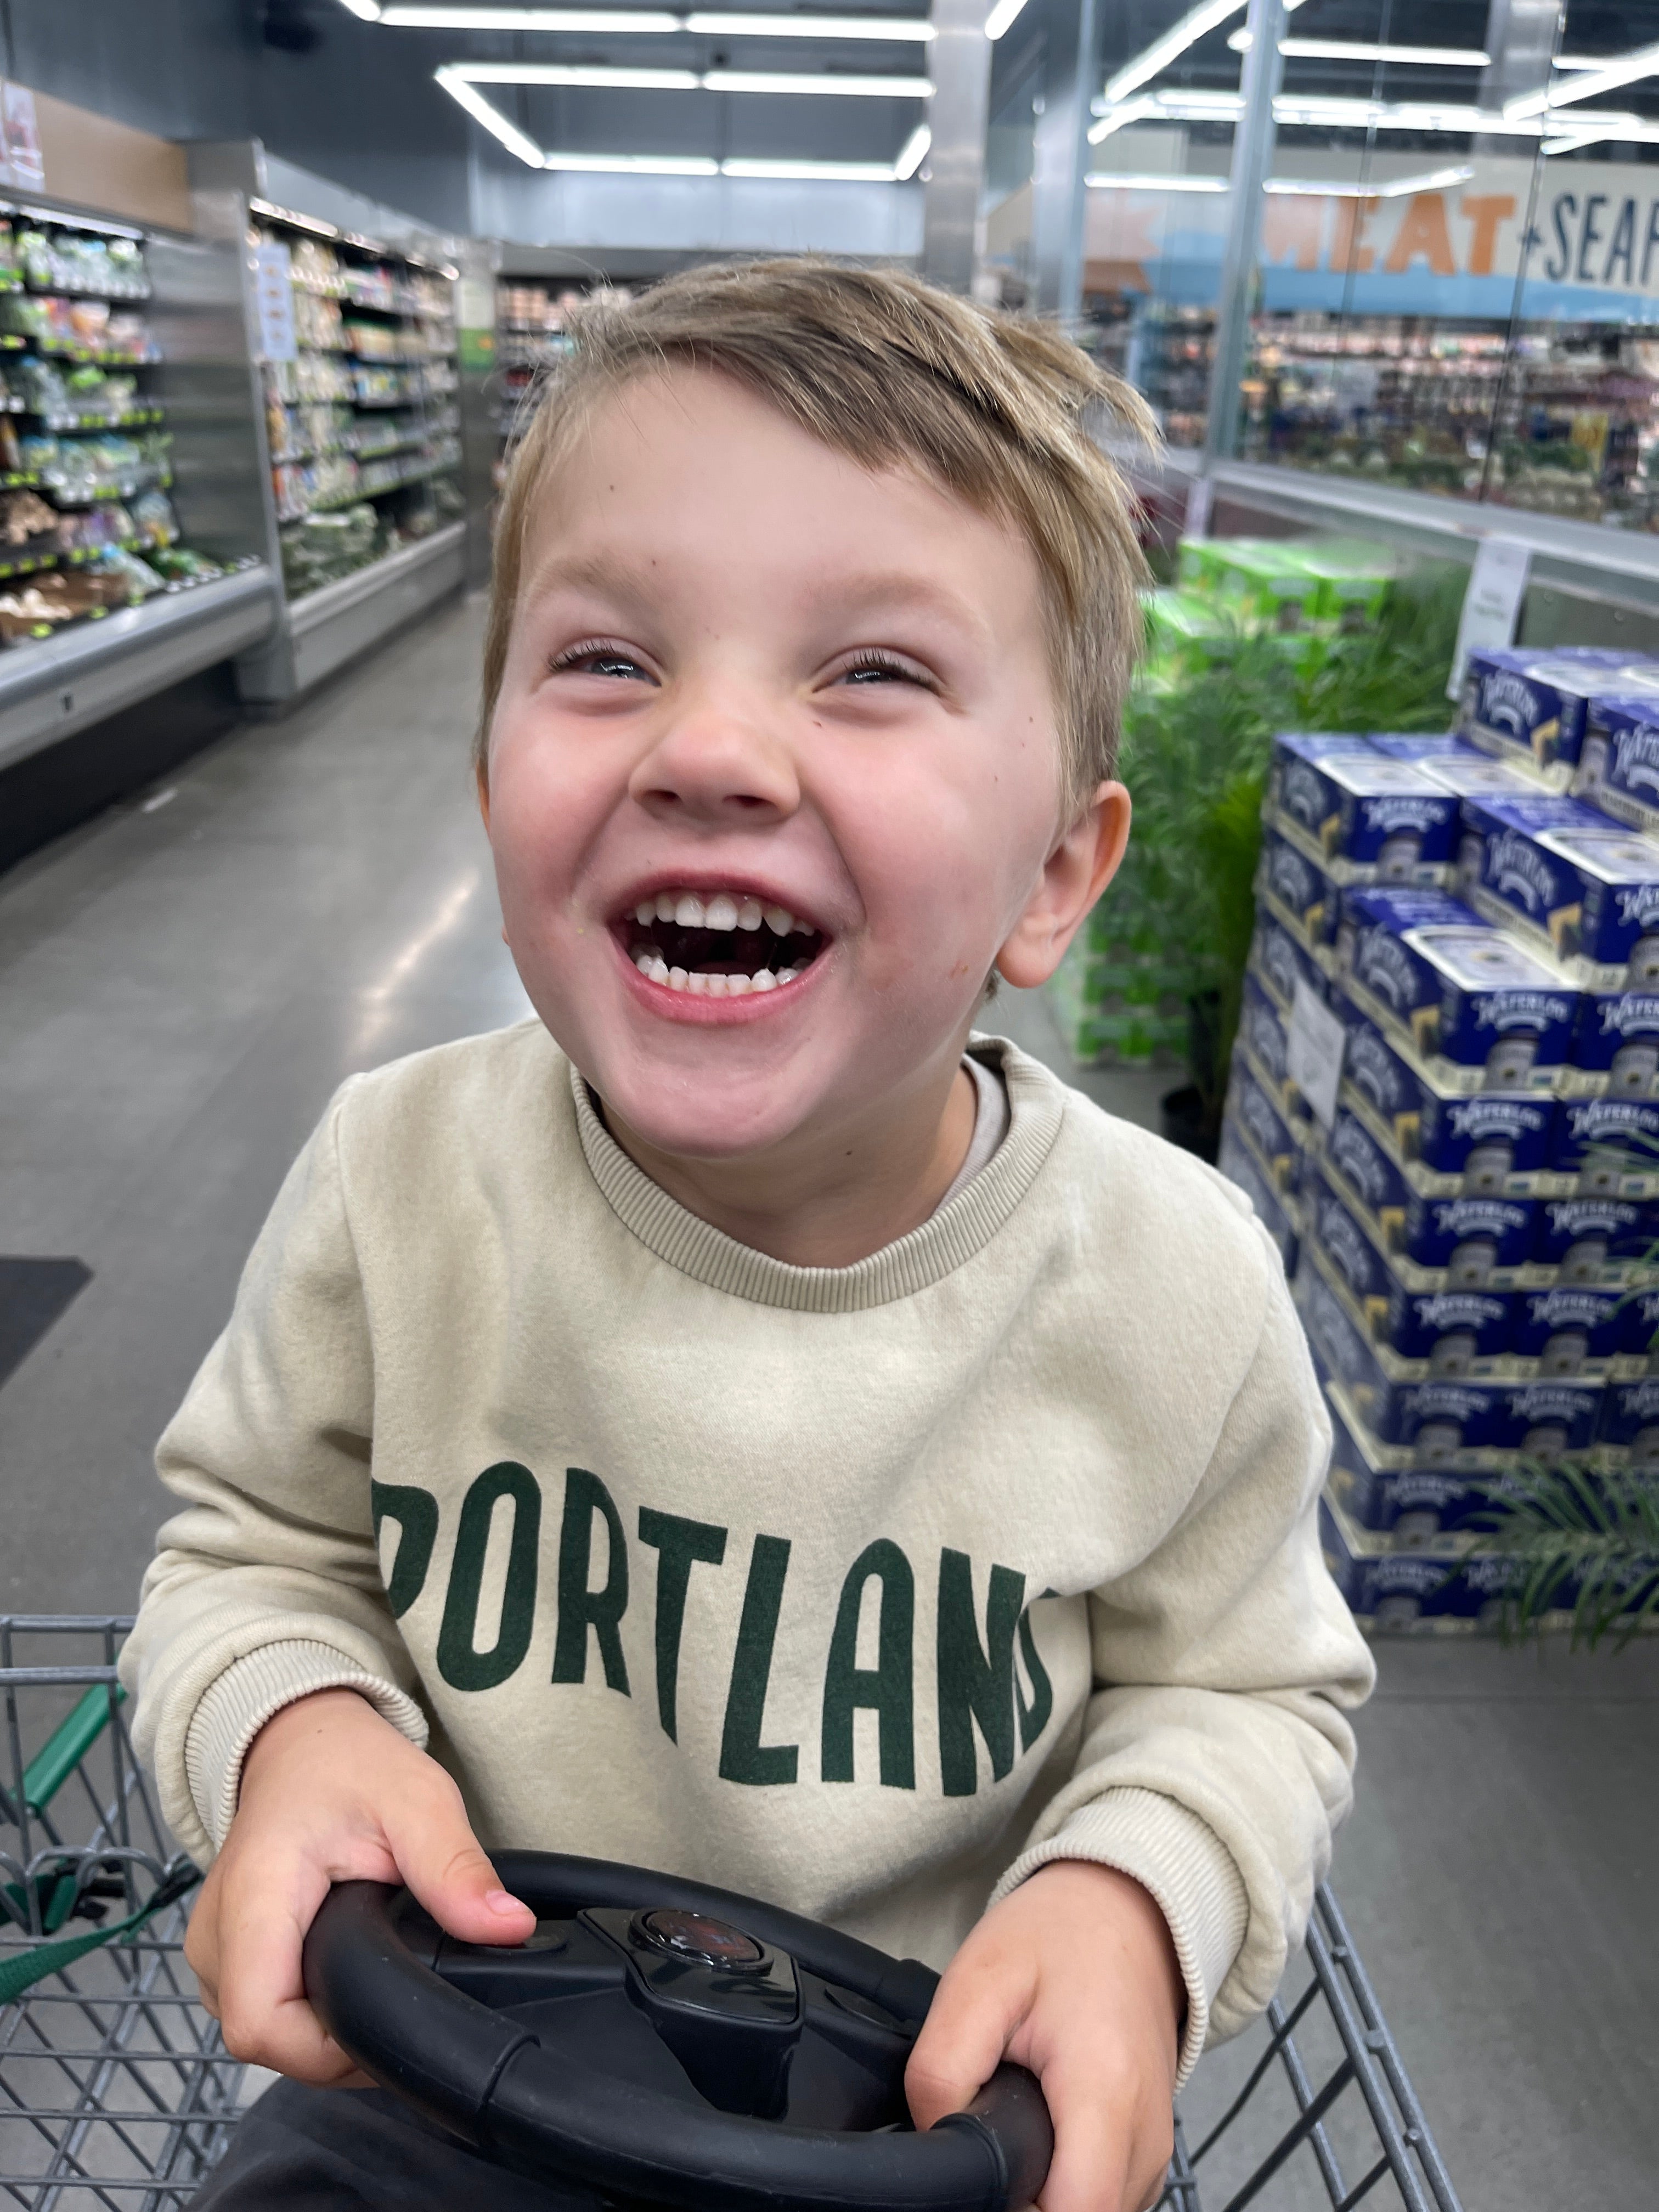 4 Tricks To Keep The Kid Entertained (SCREEN-FREE) While Grocery Shopping